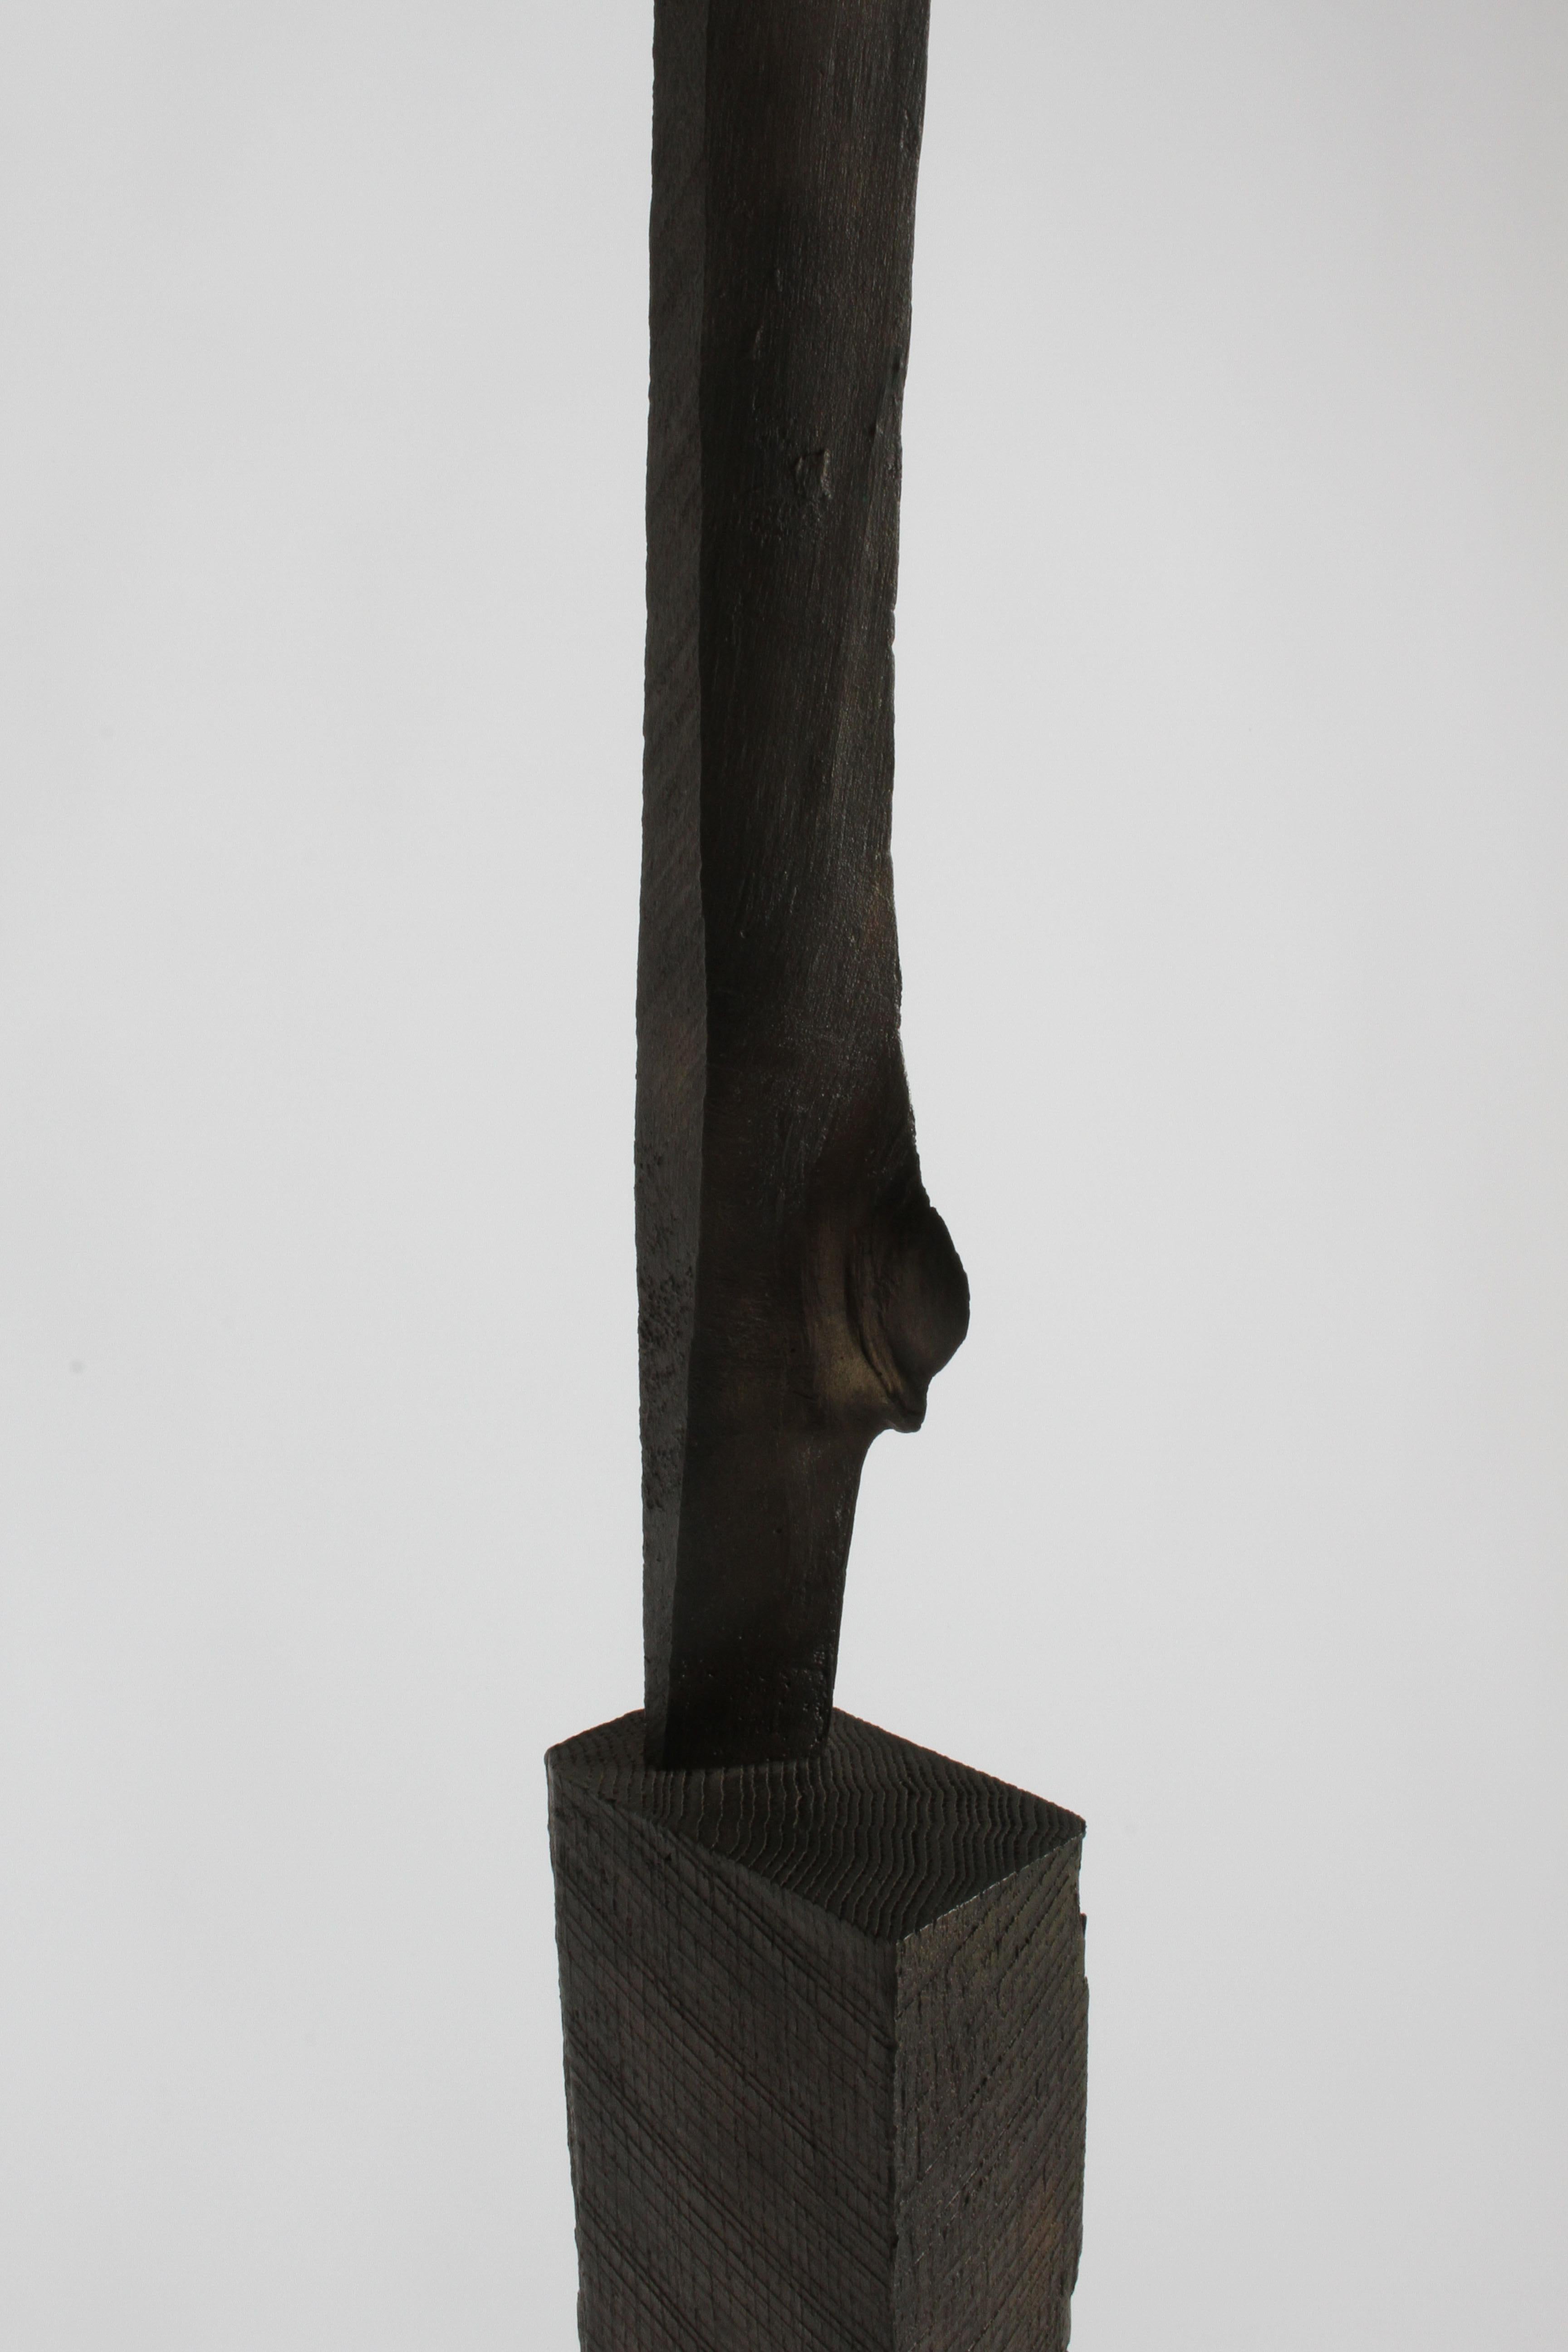 Mid-Century Modern Bronze with Wood Texture Brutalist Style TOTEM Form Sculpture For Sale 8